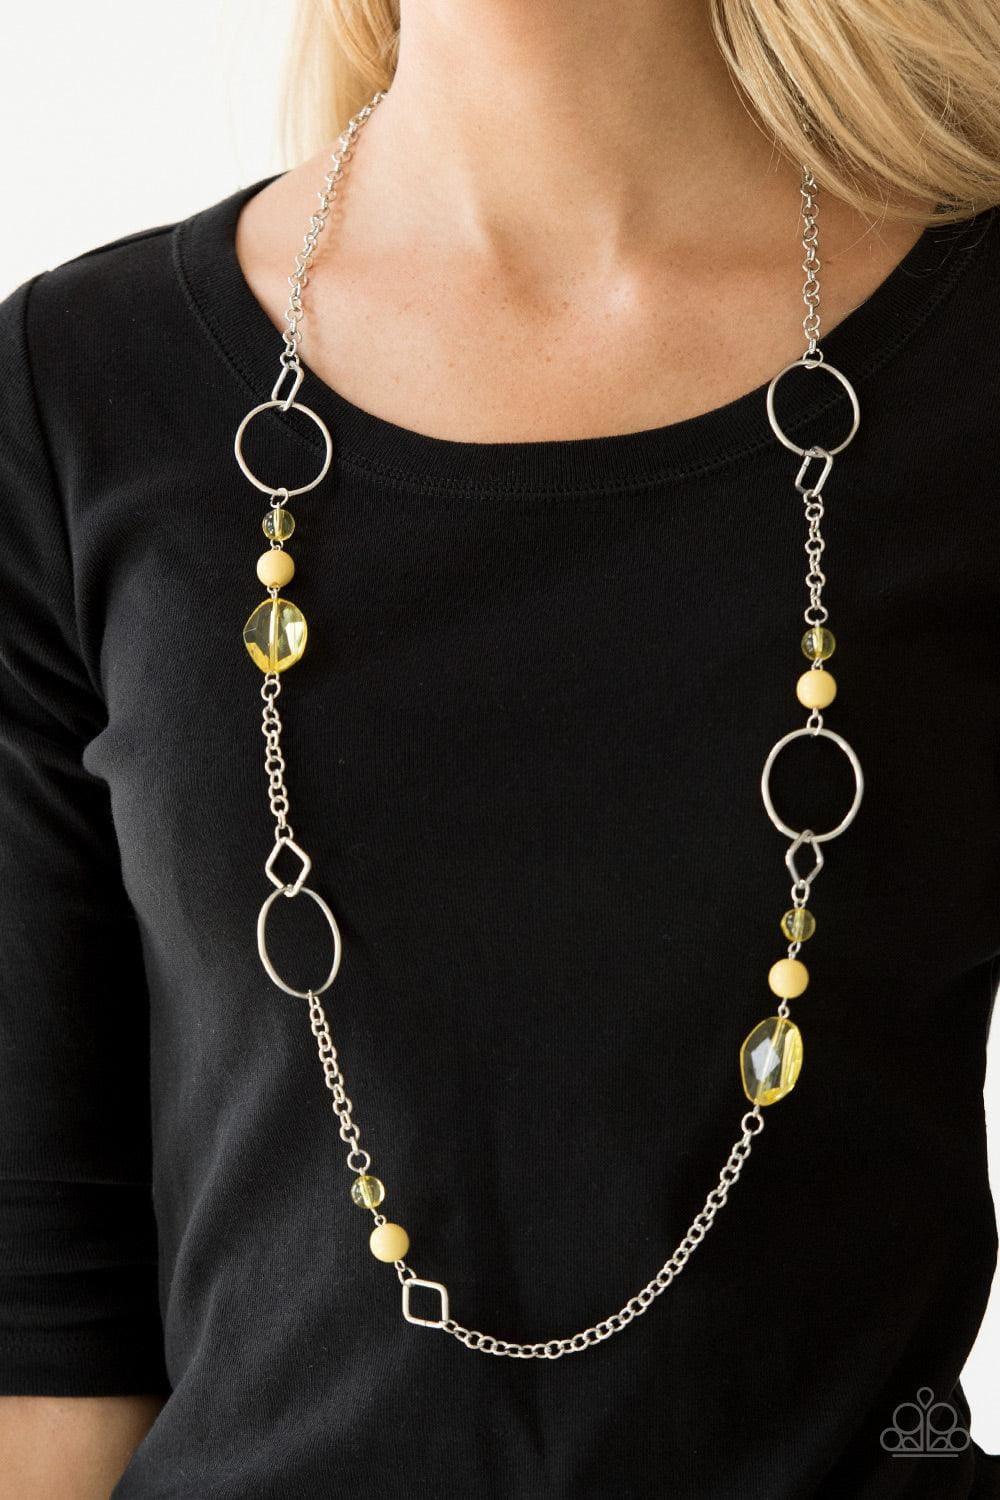 Paparazzi Accessories - Very Visionary - Yellow Necklace - Bling by JessieK